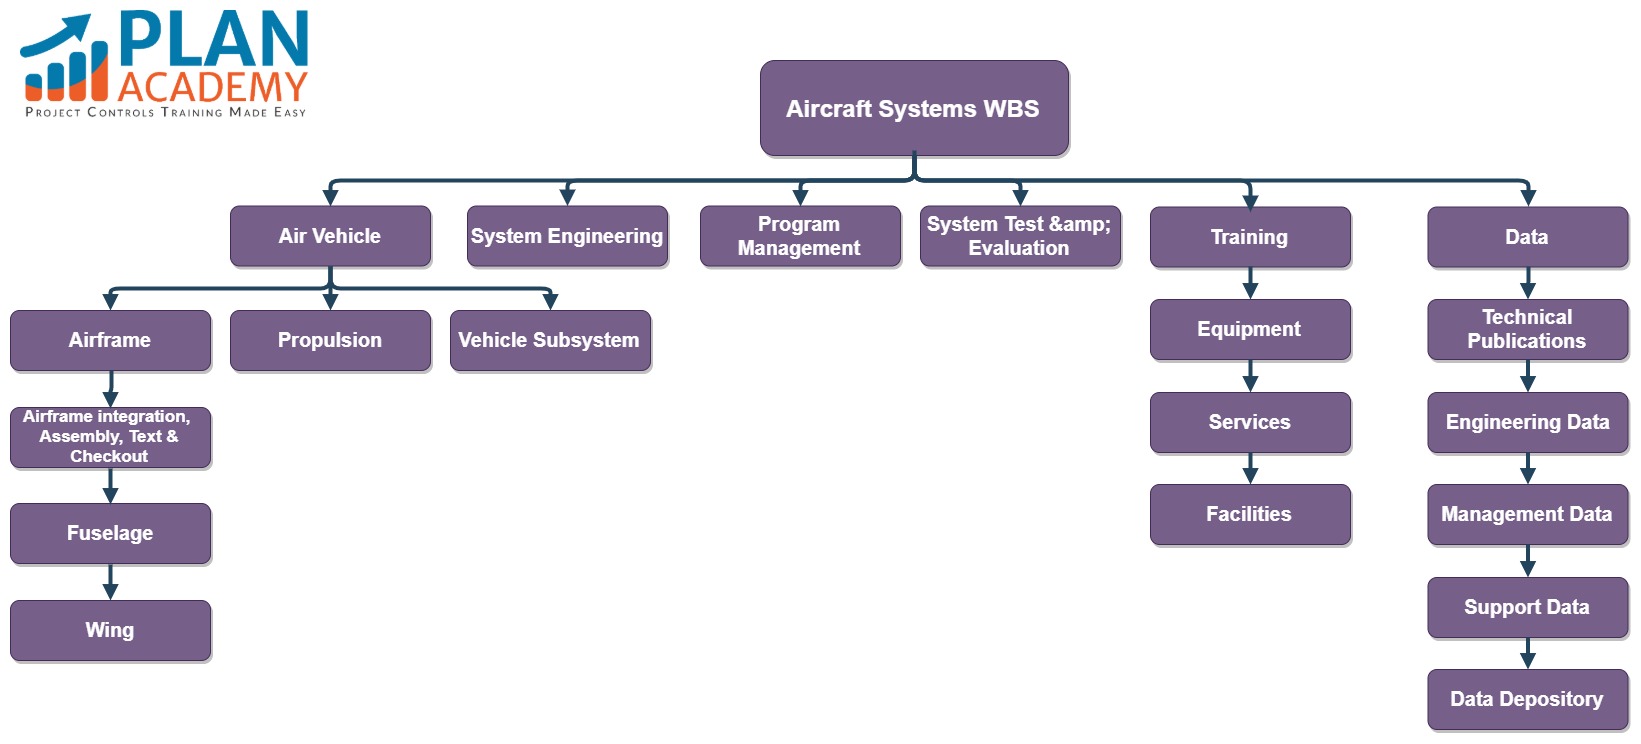 example aircraft systems project wbs